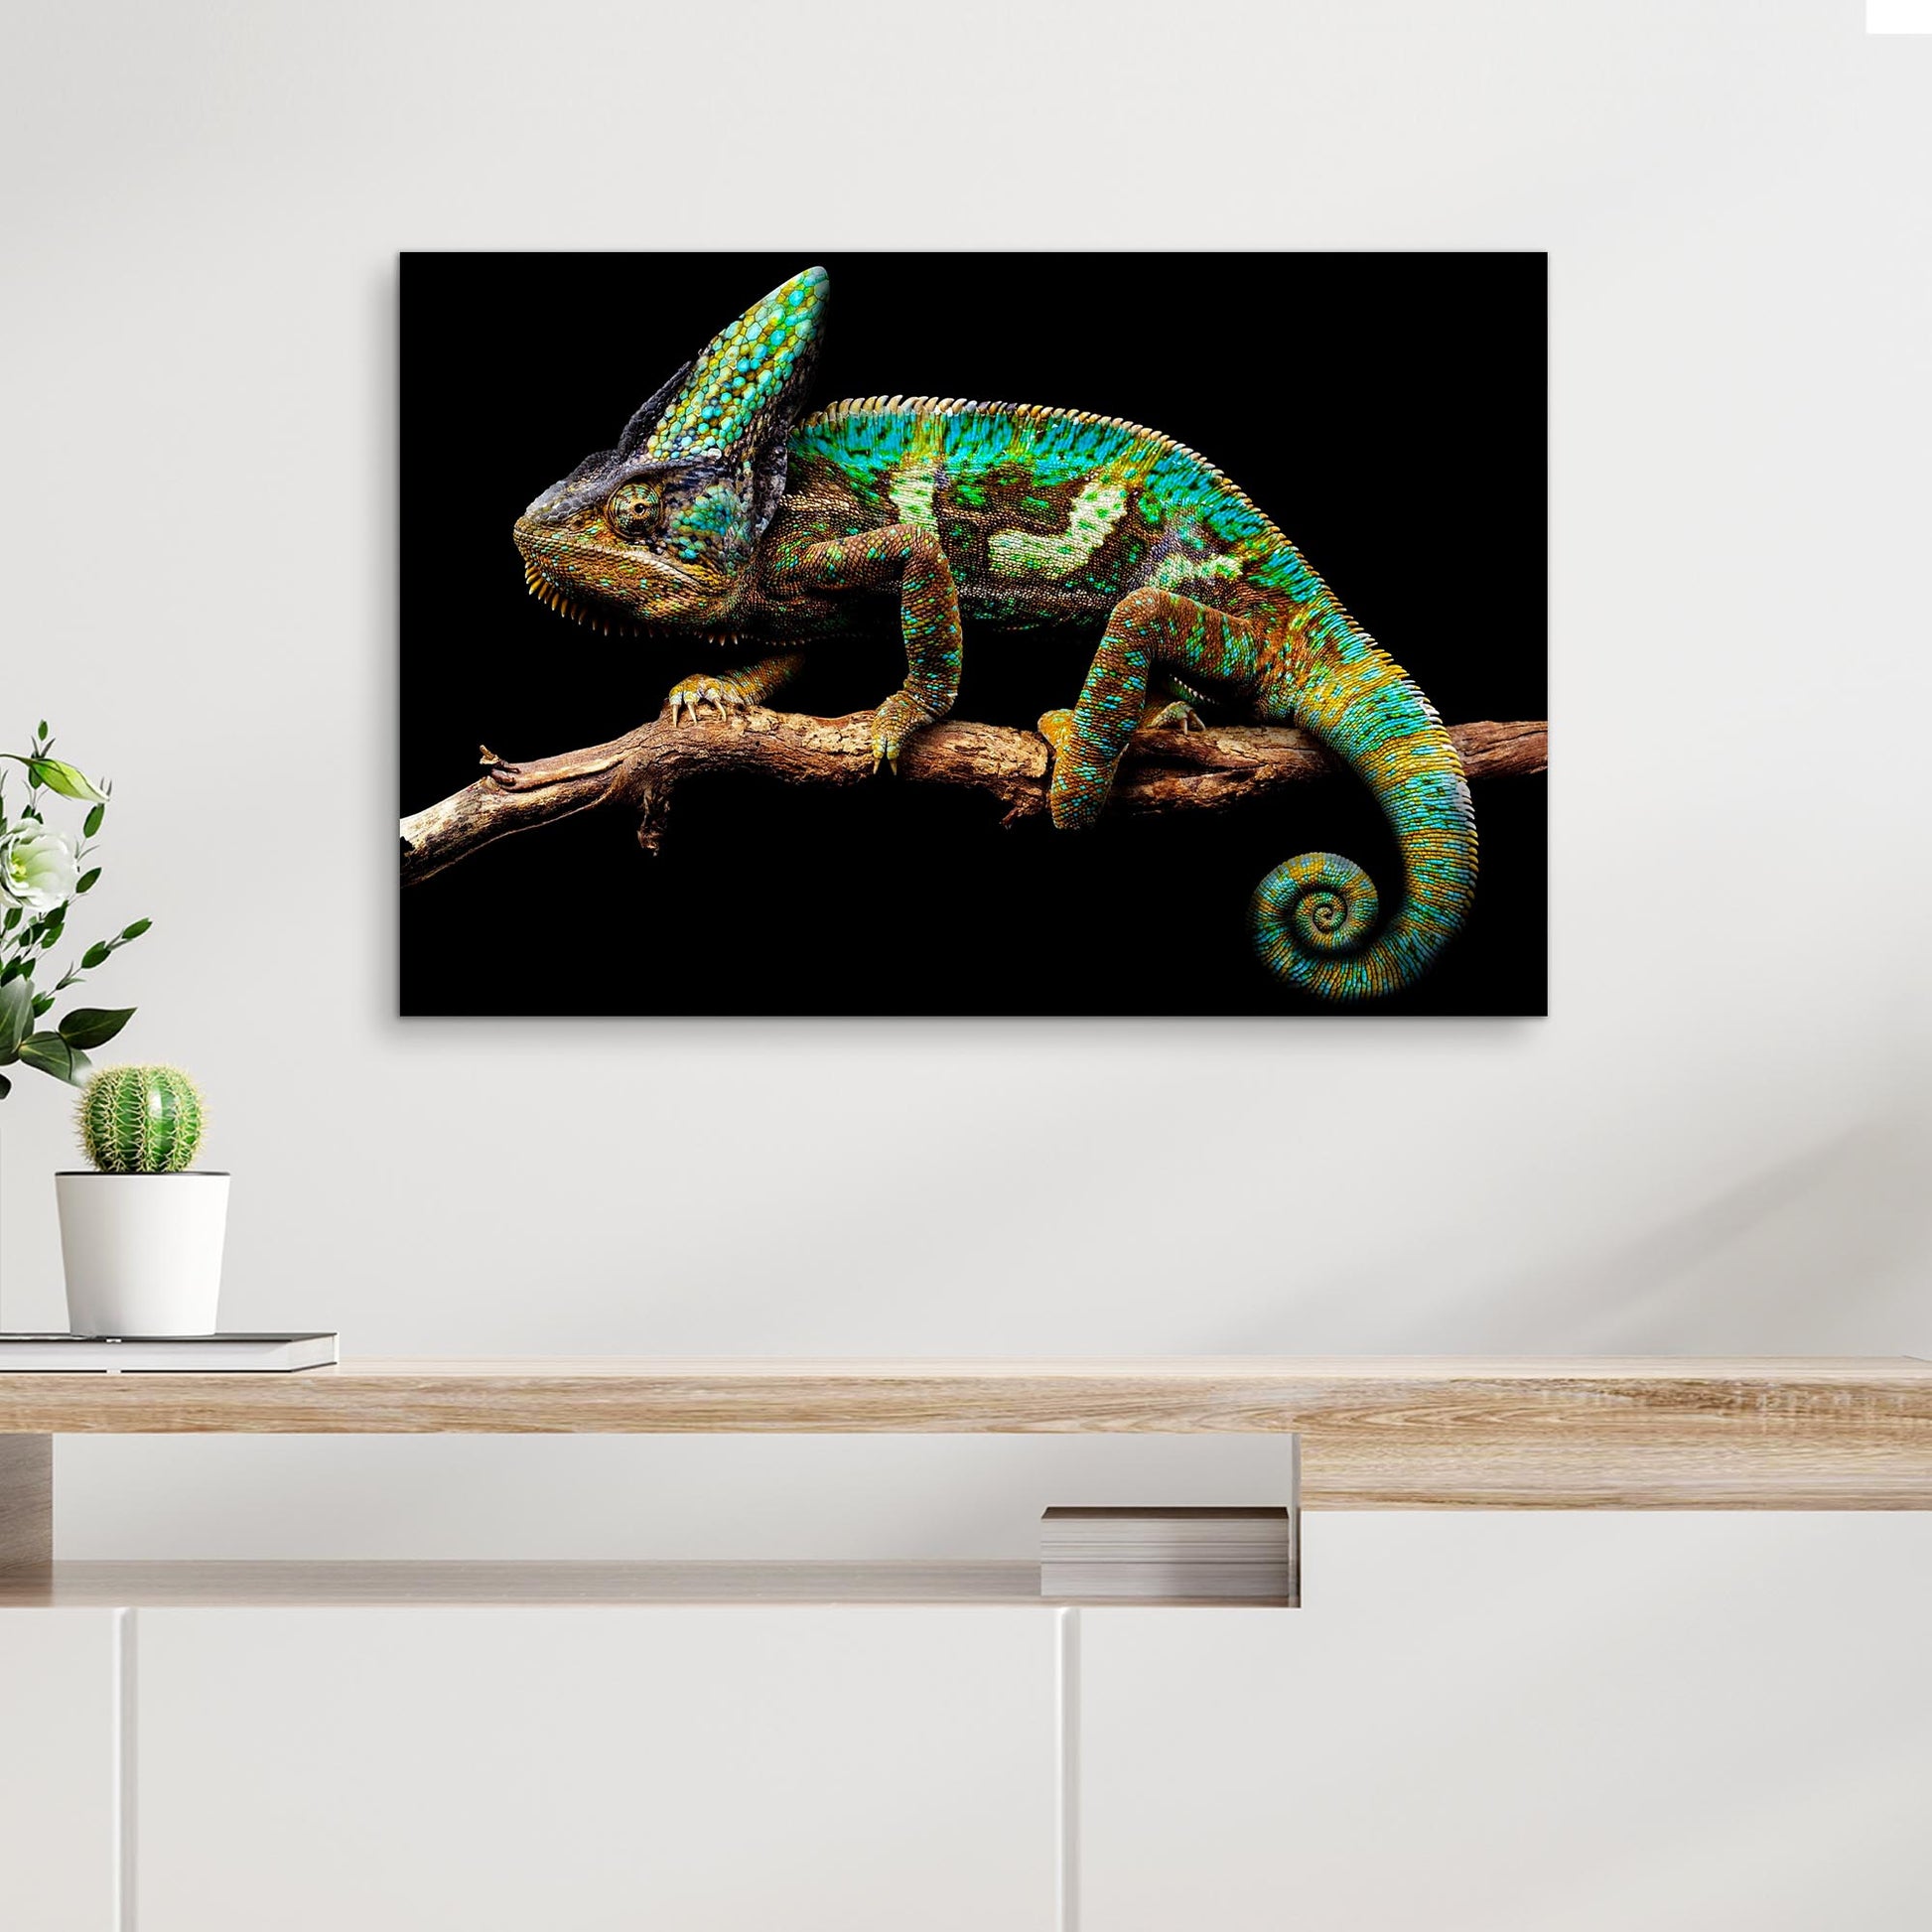 Reptile Lizard Veiled Chameleon Canvas Wall Art - by Tailored Canvases